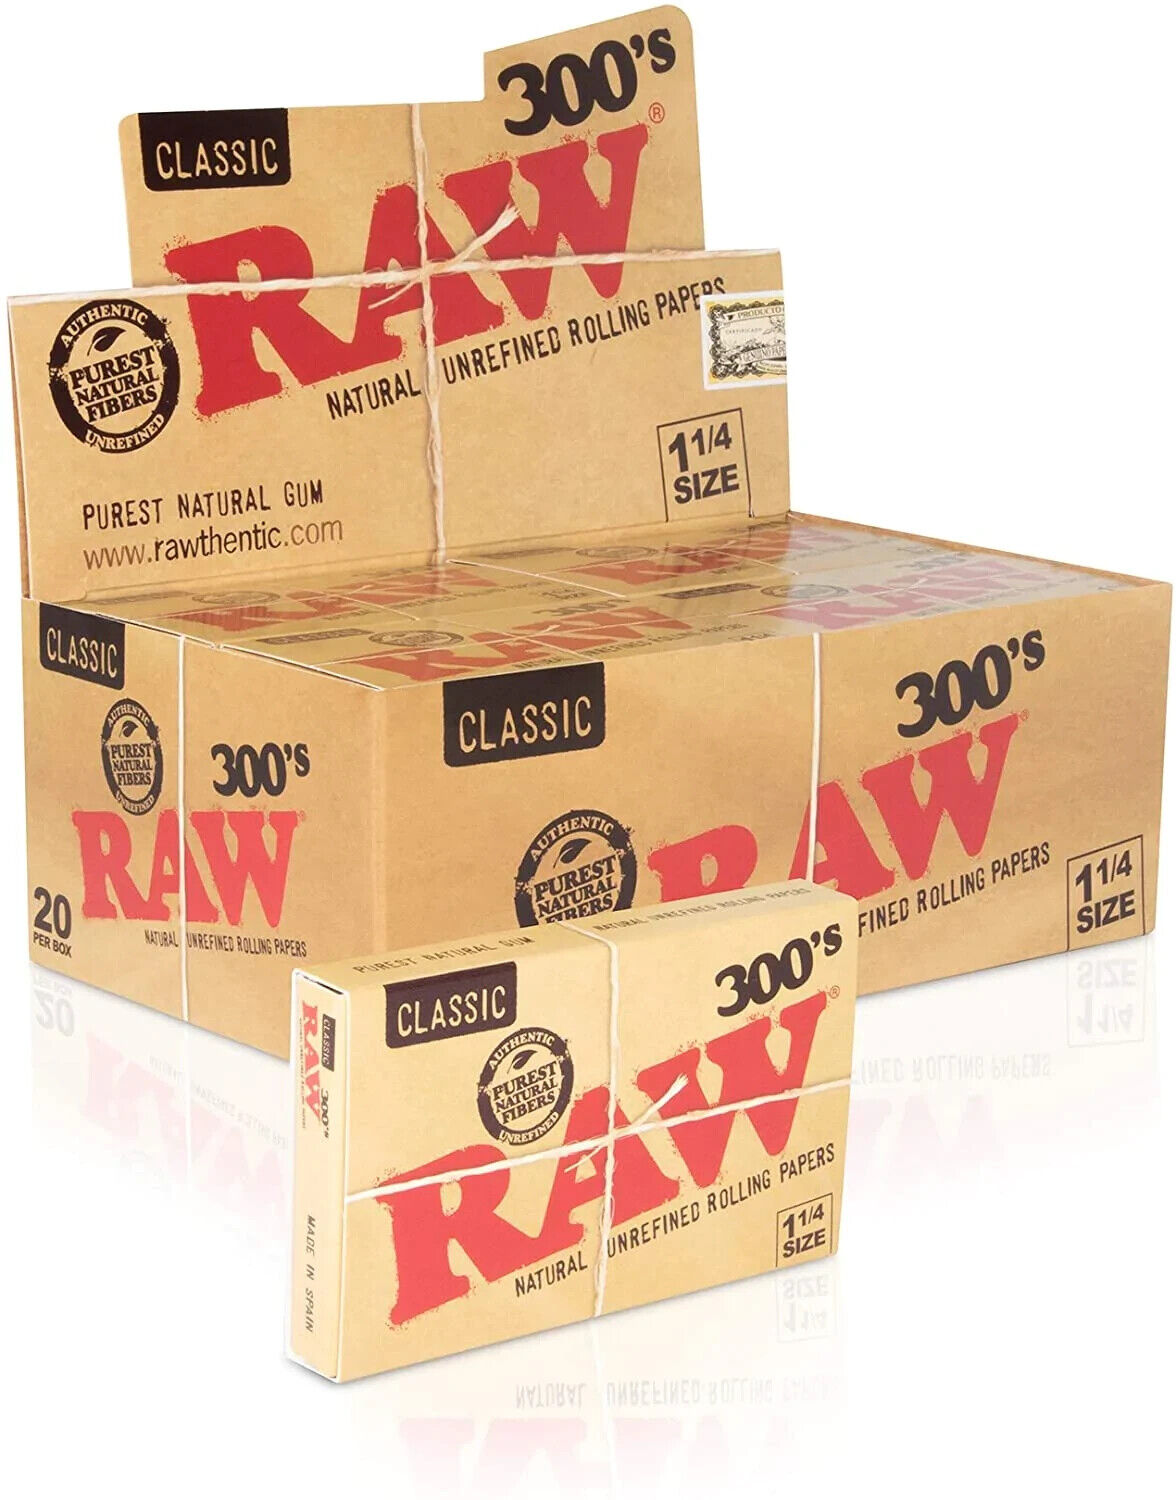 😎RAW CLASSIC NATURAL UNREFINED ROLLING PAPERS FULL BOX 1 1/4 -✨300's💛20 PACKS